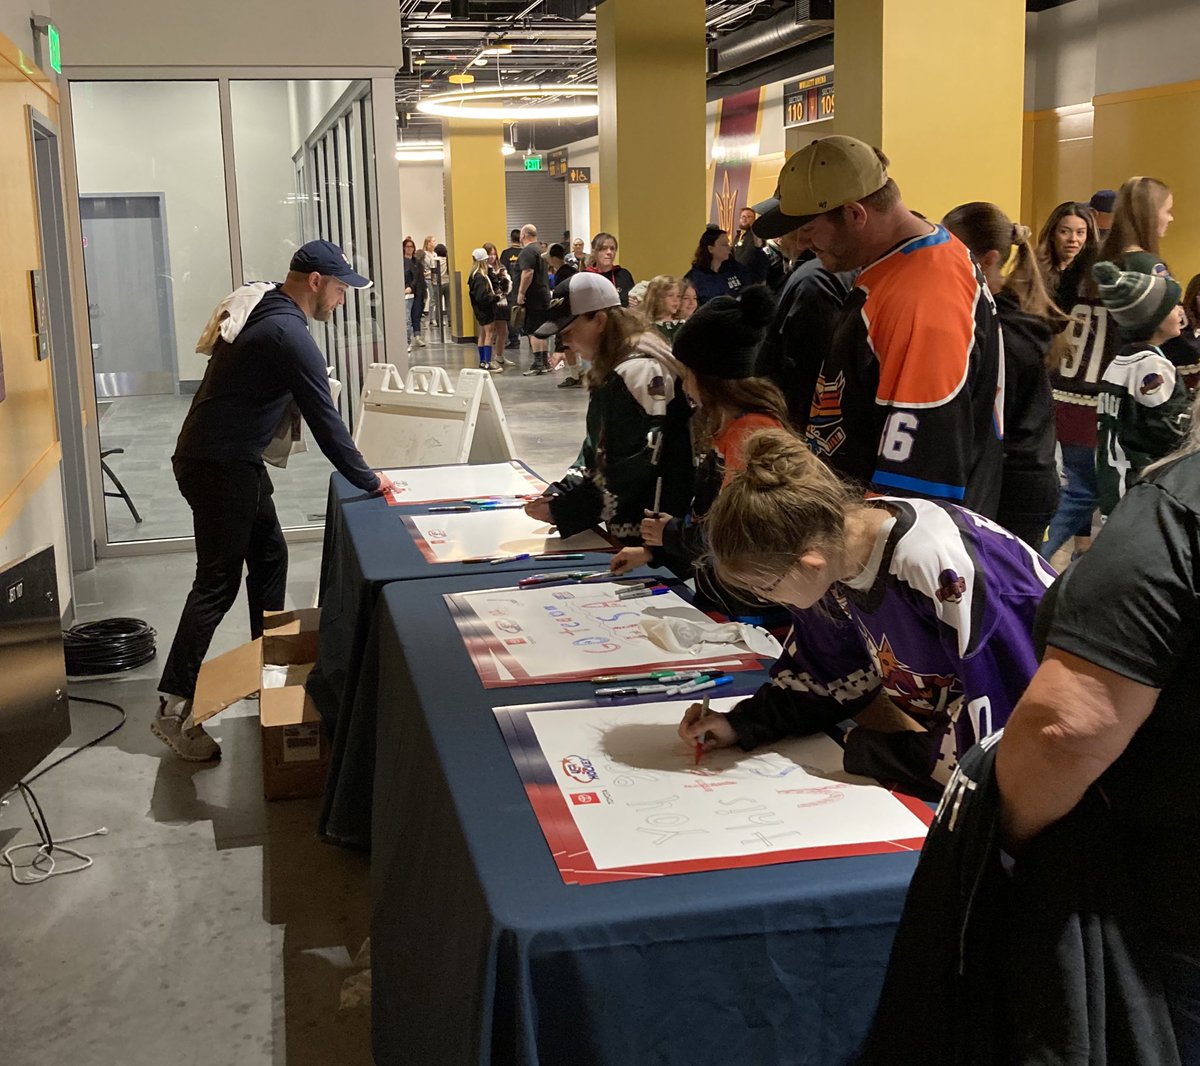 Live from Mullet, it’s game day for USA and Canada!! The sign making station is going strong ahead of tonight’s puck drop between the biggest rivals in women’s hockey.